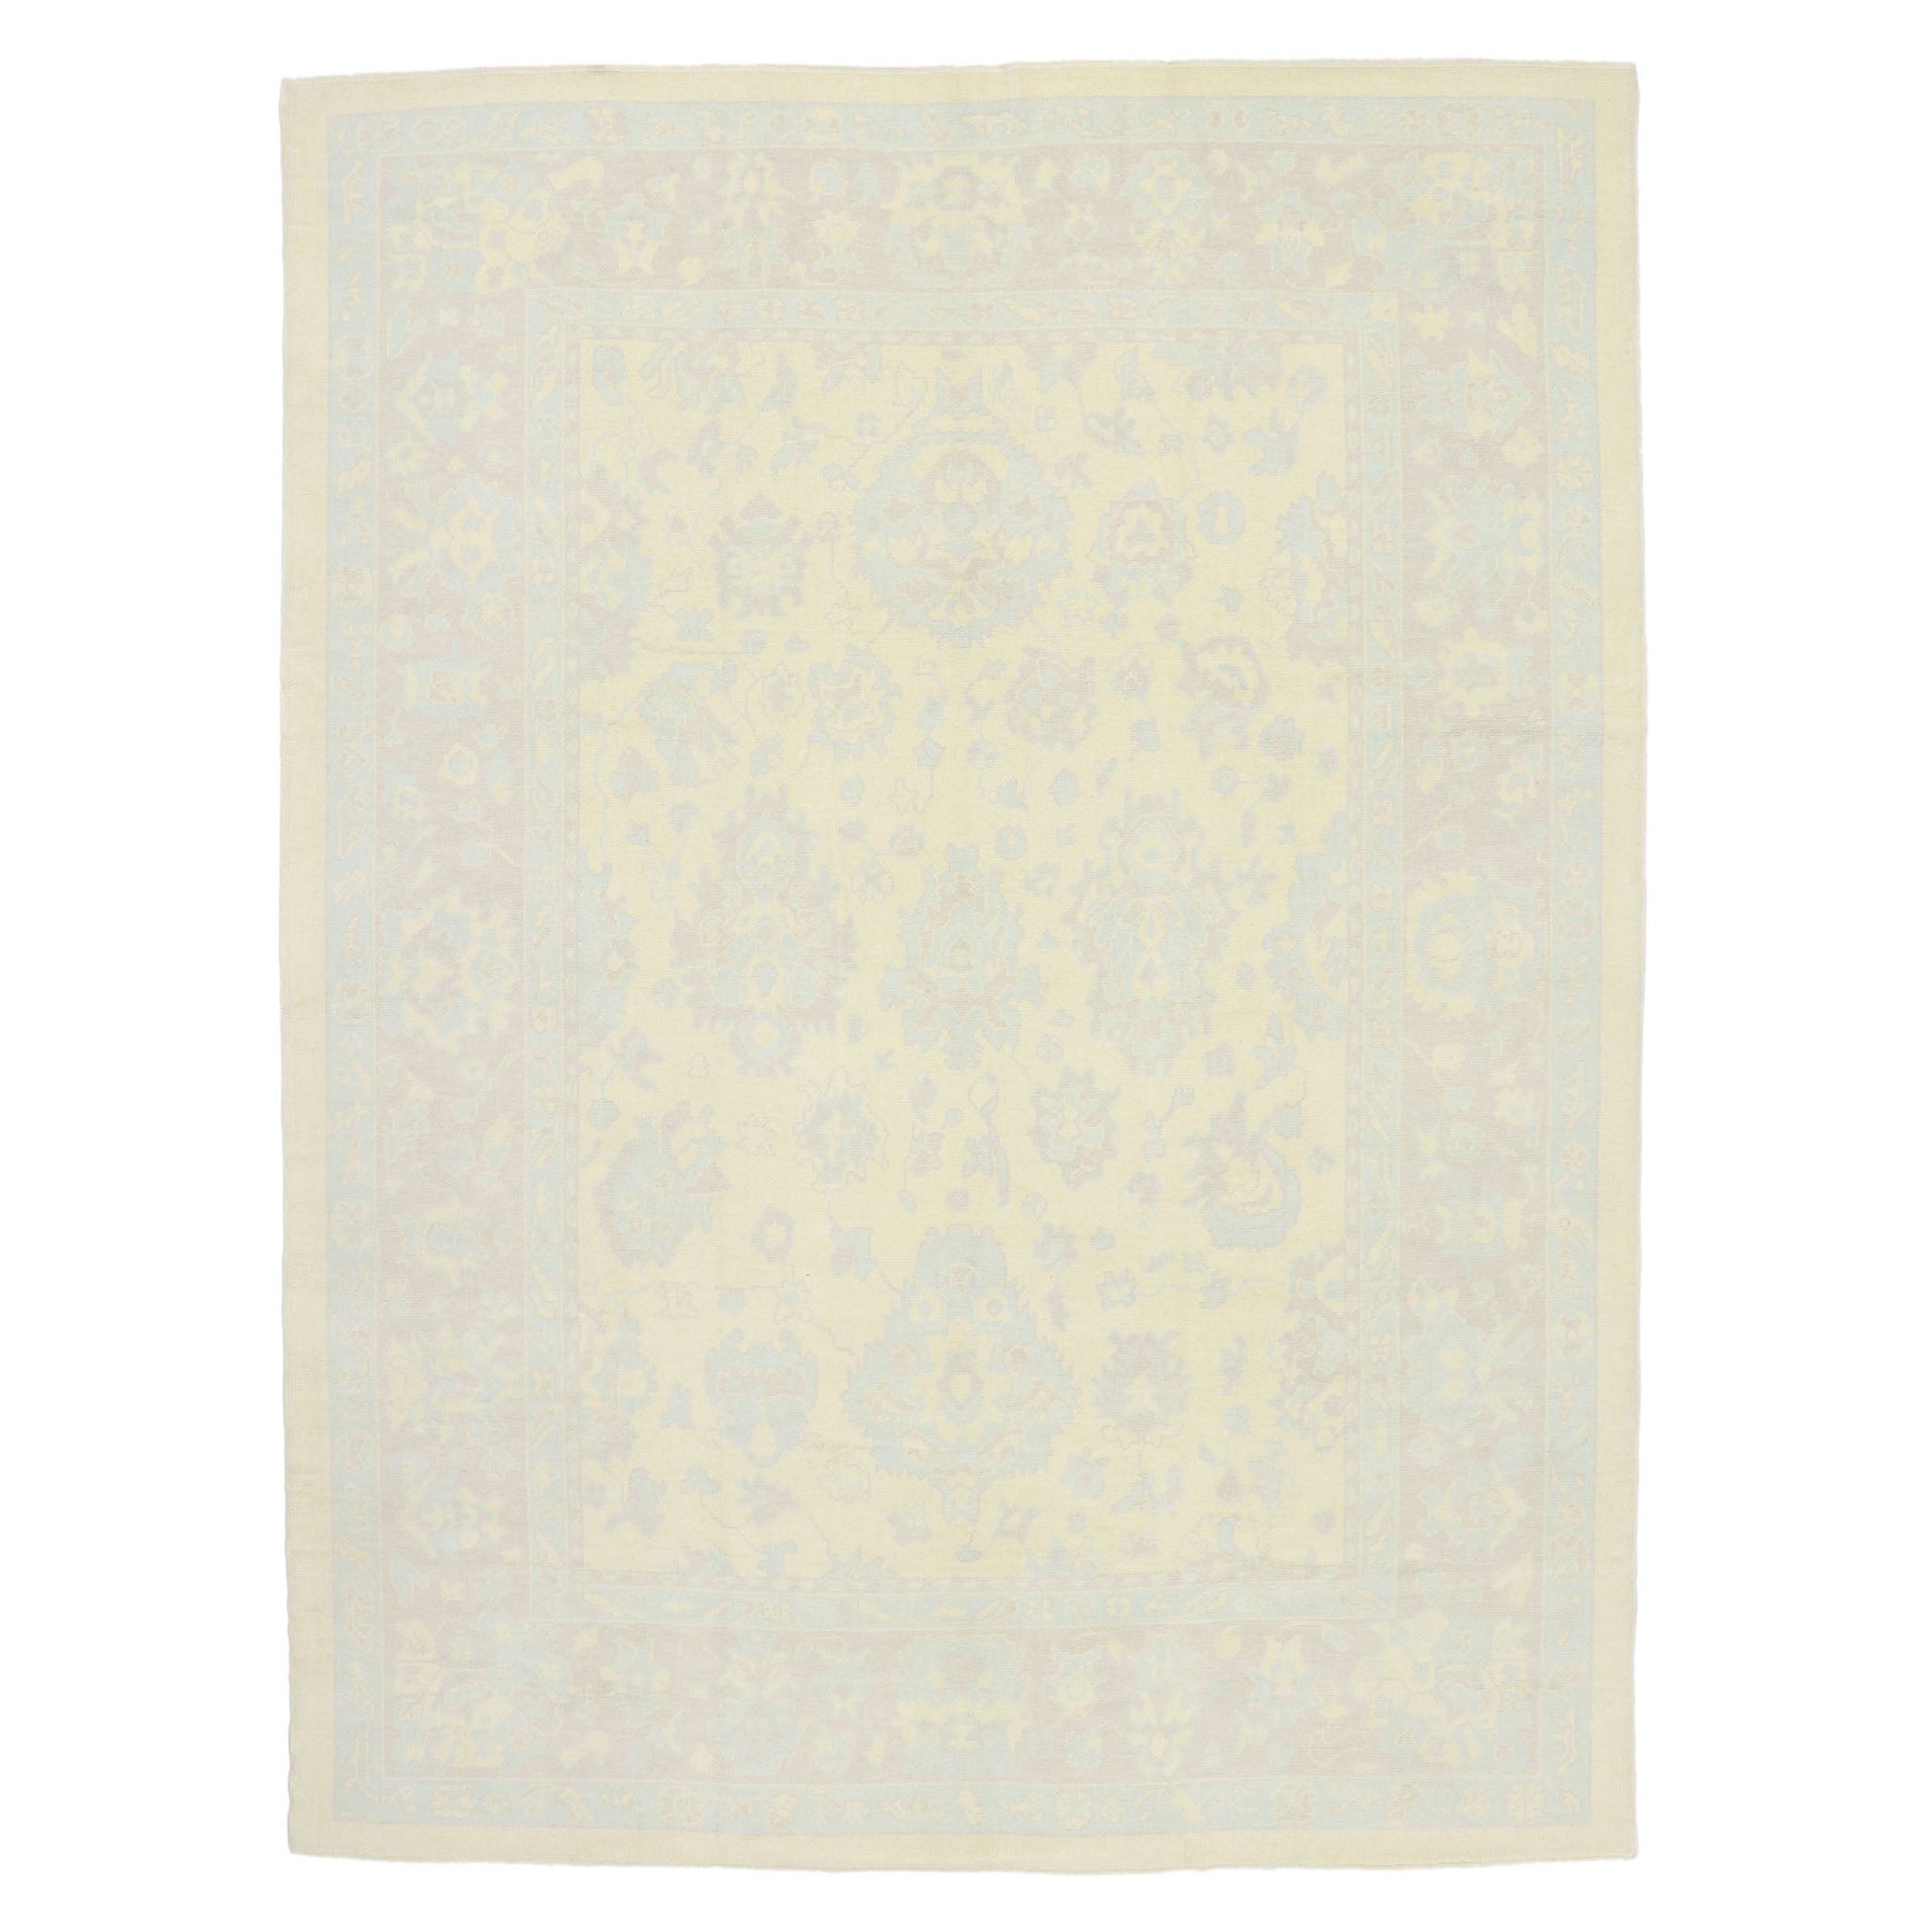 New Muted Turkish Oushak Rug, French Country Cottage Meets Modern Style